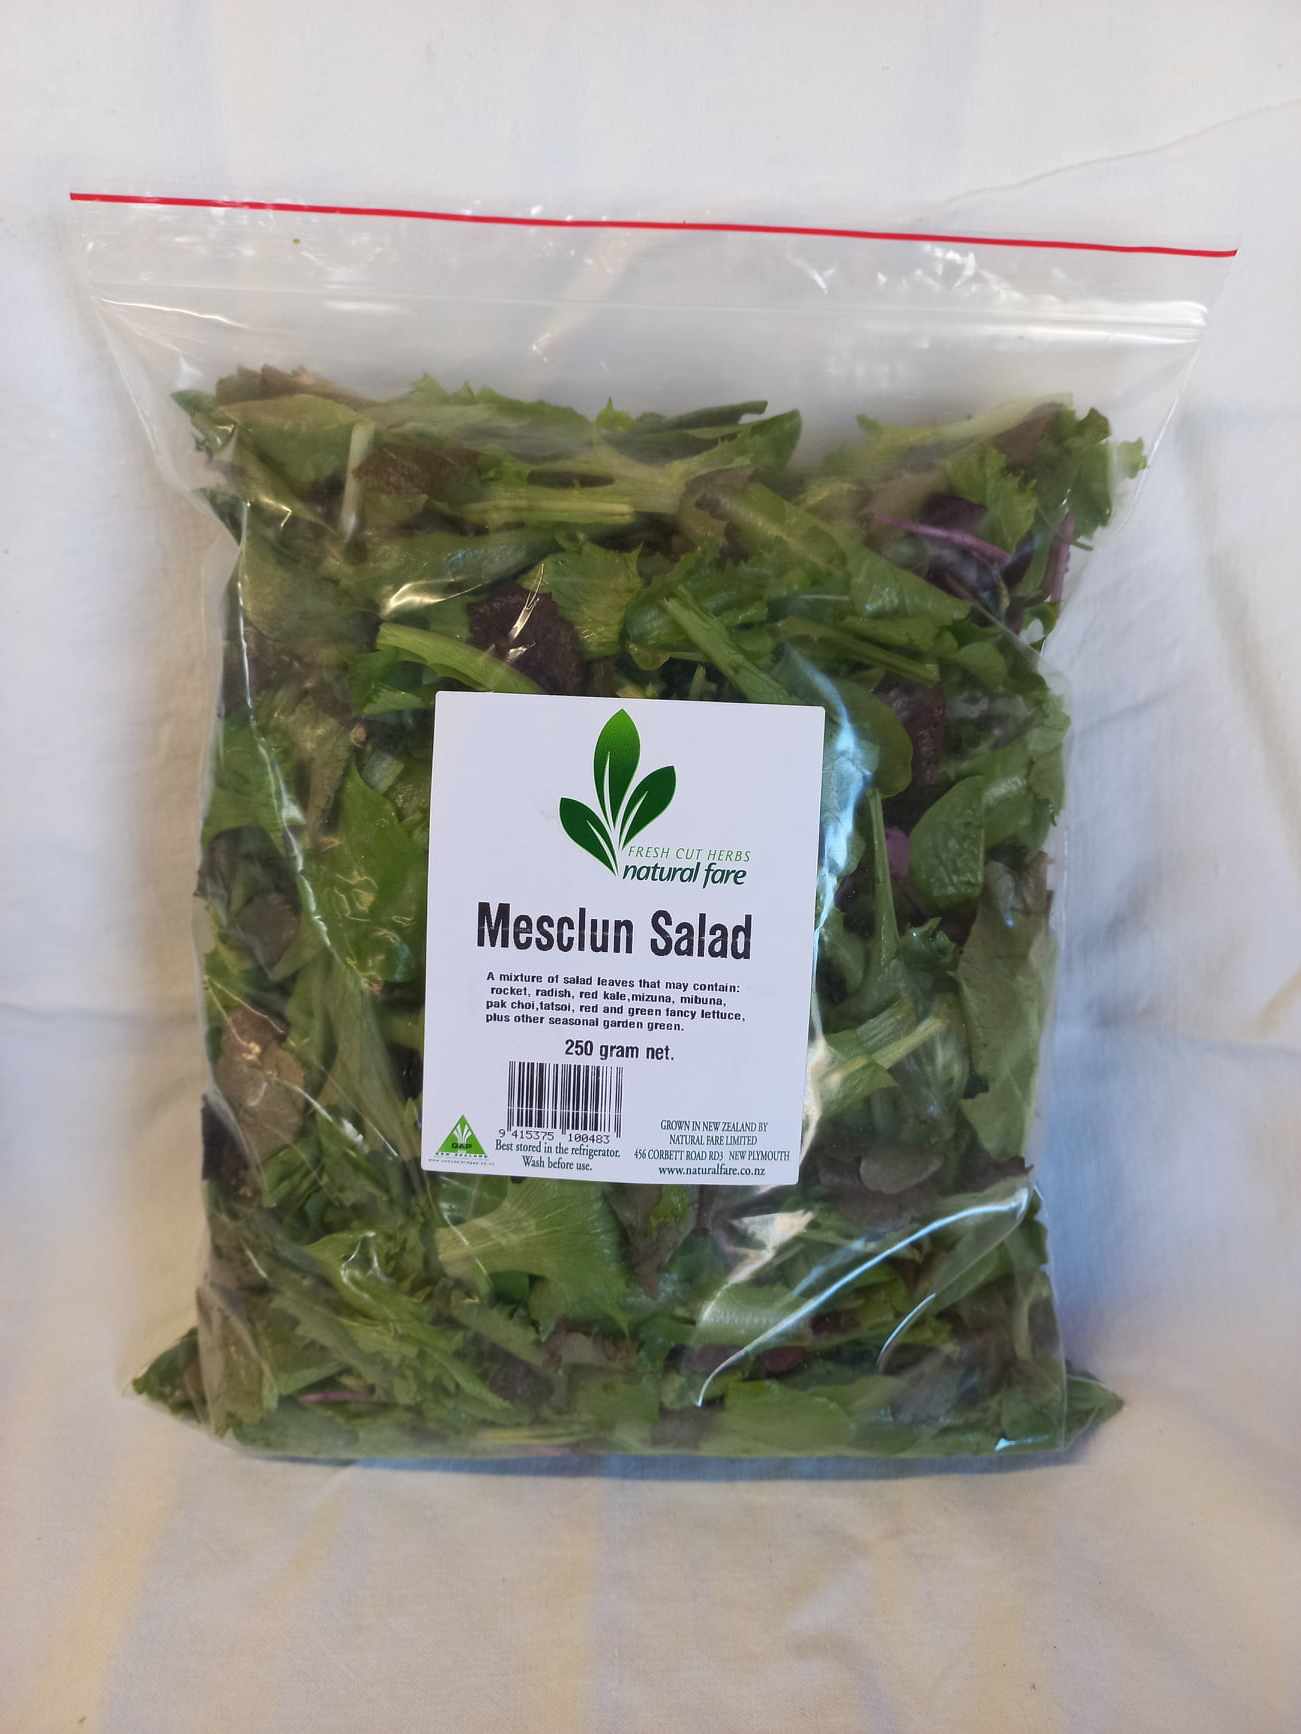 Mesclun Salad with Lettuce